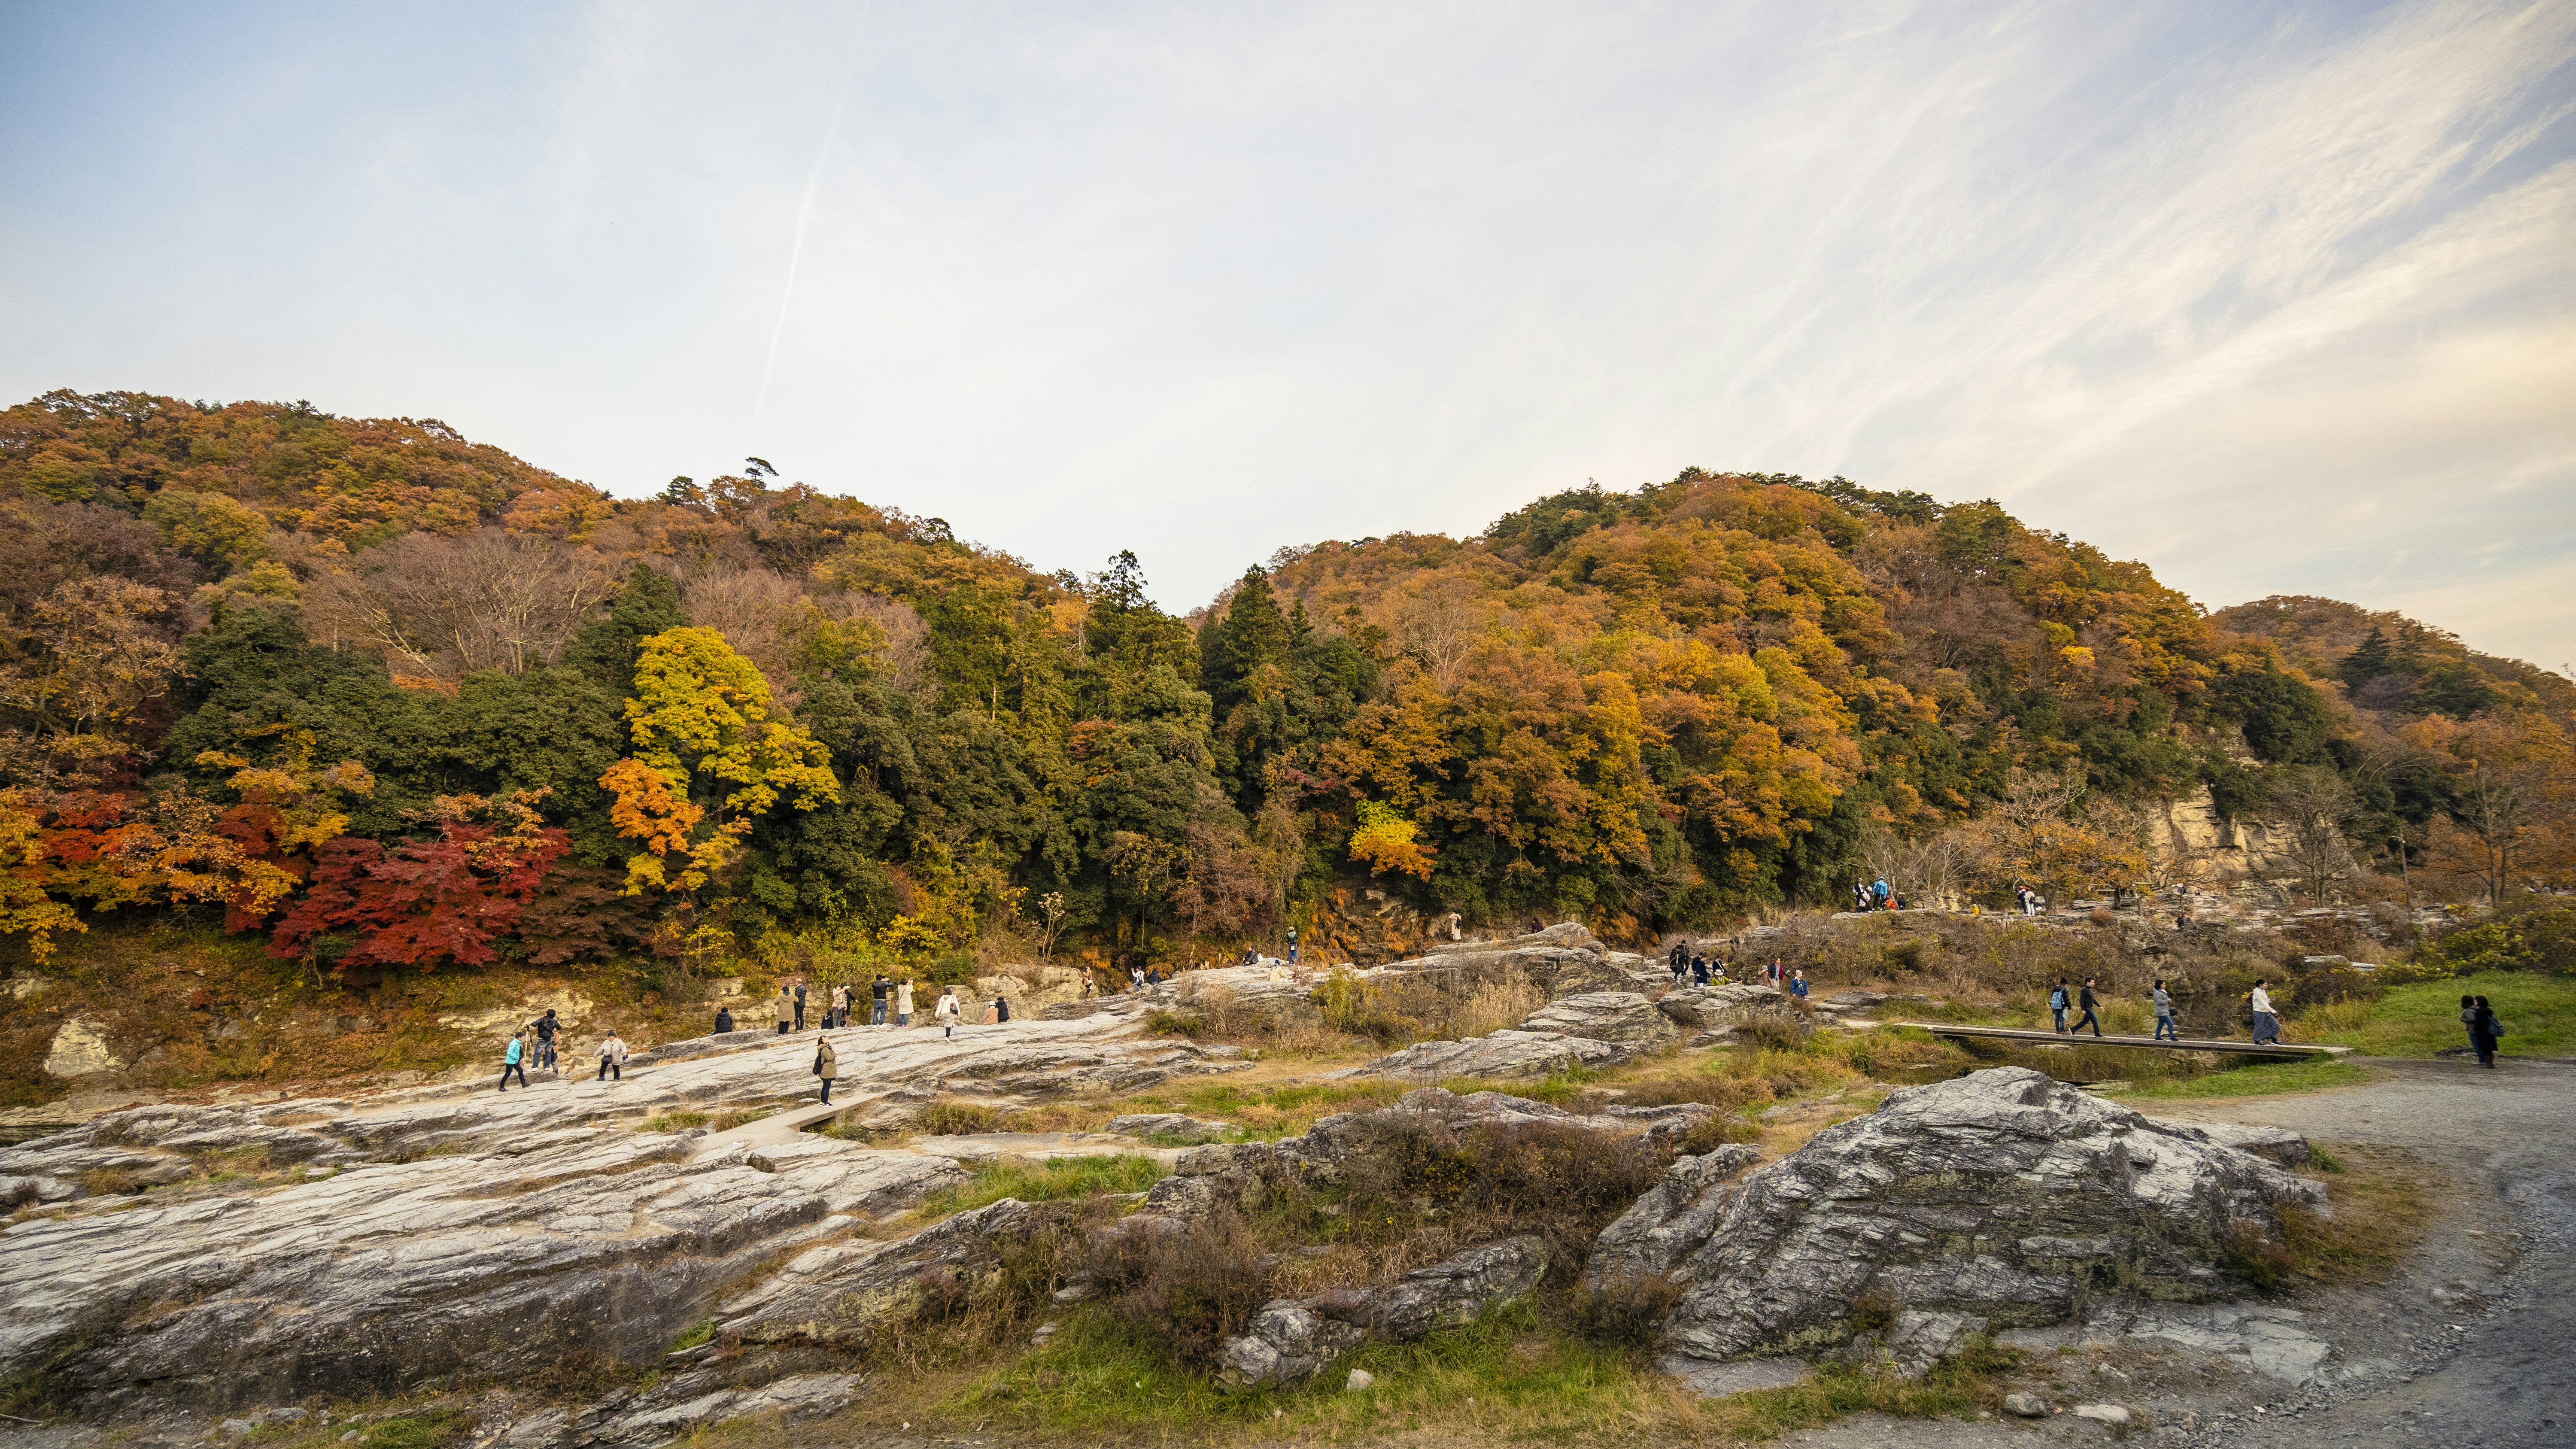 People hiking across rocky terrain with a backdrop of autumnal foliage